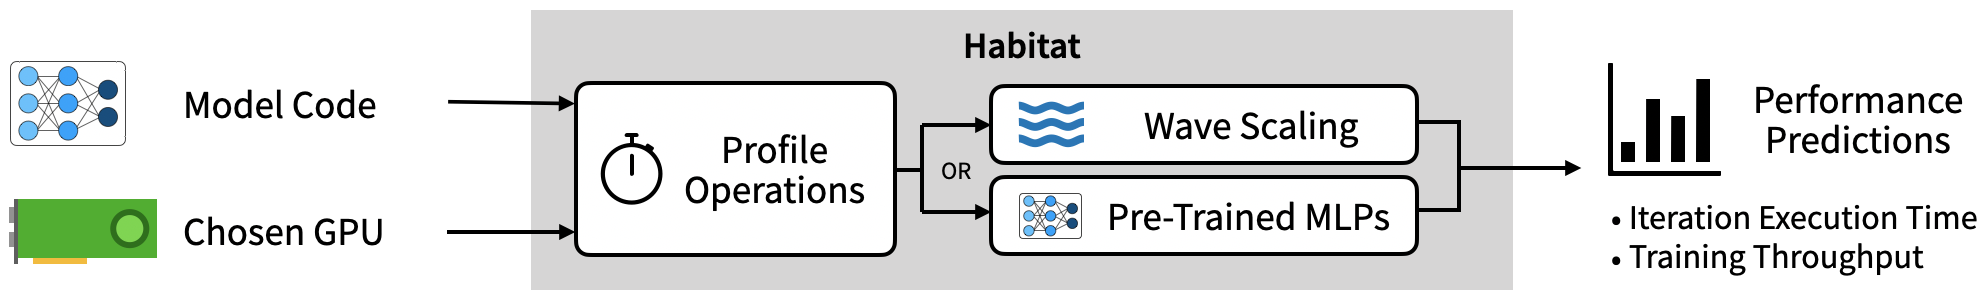 An overview of Habitat's prediction workflow.